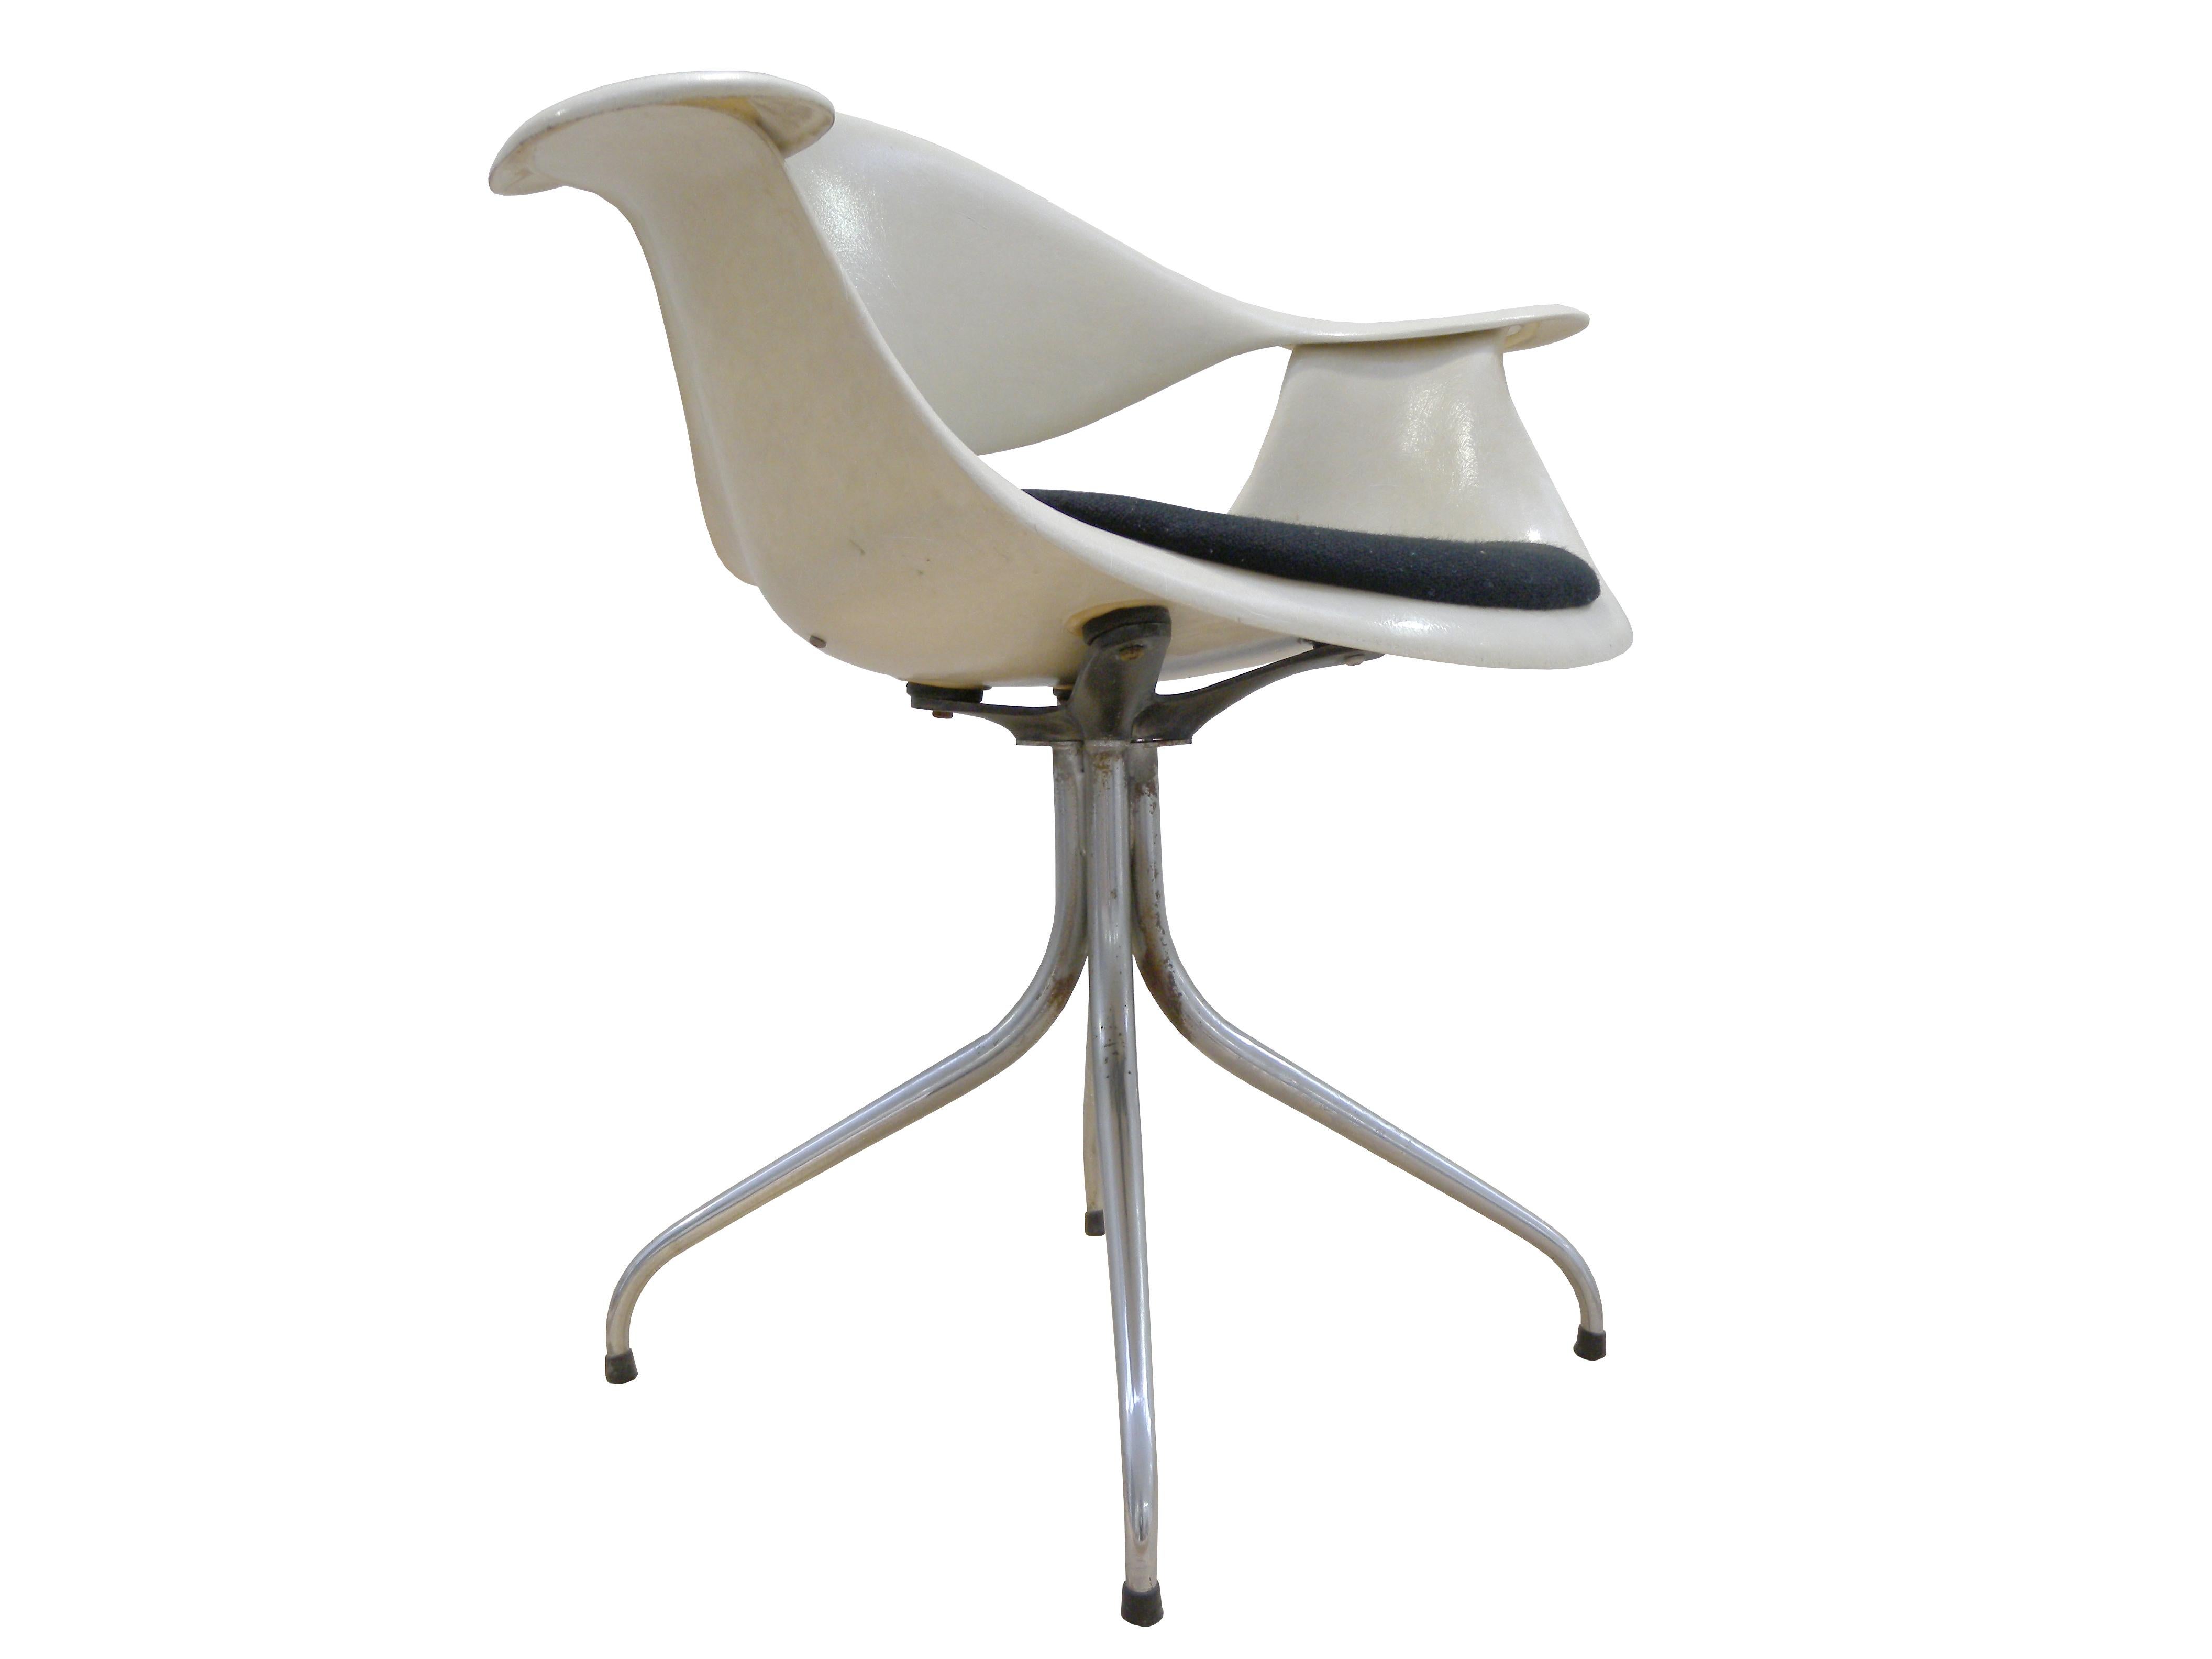 George Nelson (1908-1986) is a major designer of the American Mid-Century Modern like Charles Eames. He was also an influential director of design at Herman Miller. He worked there for over a quarter-century, helping the company come up with their